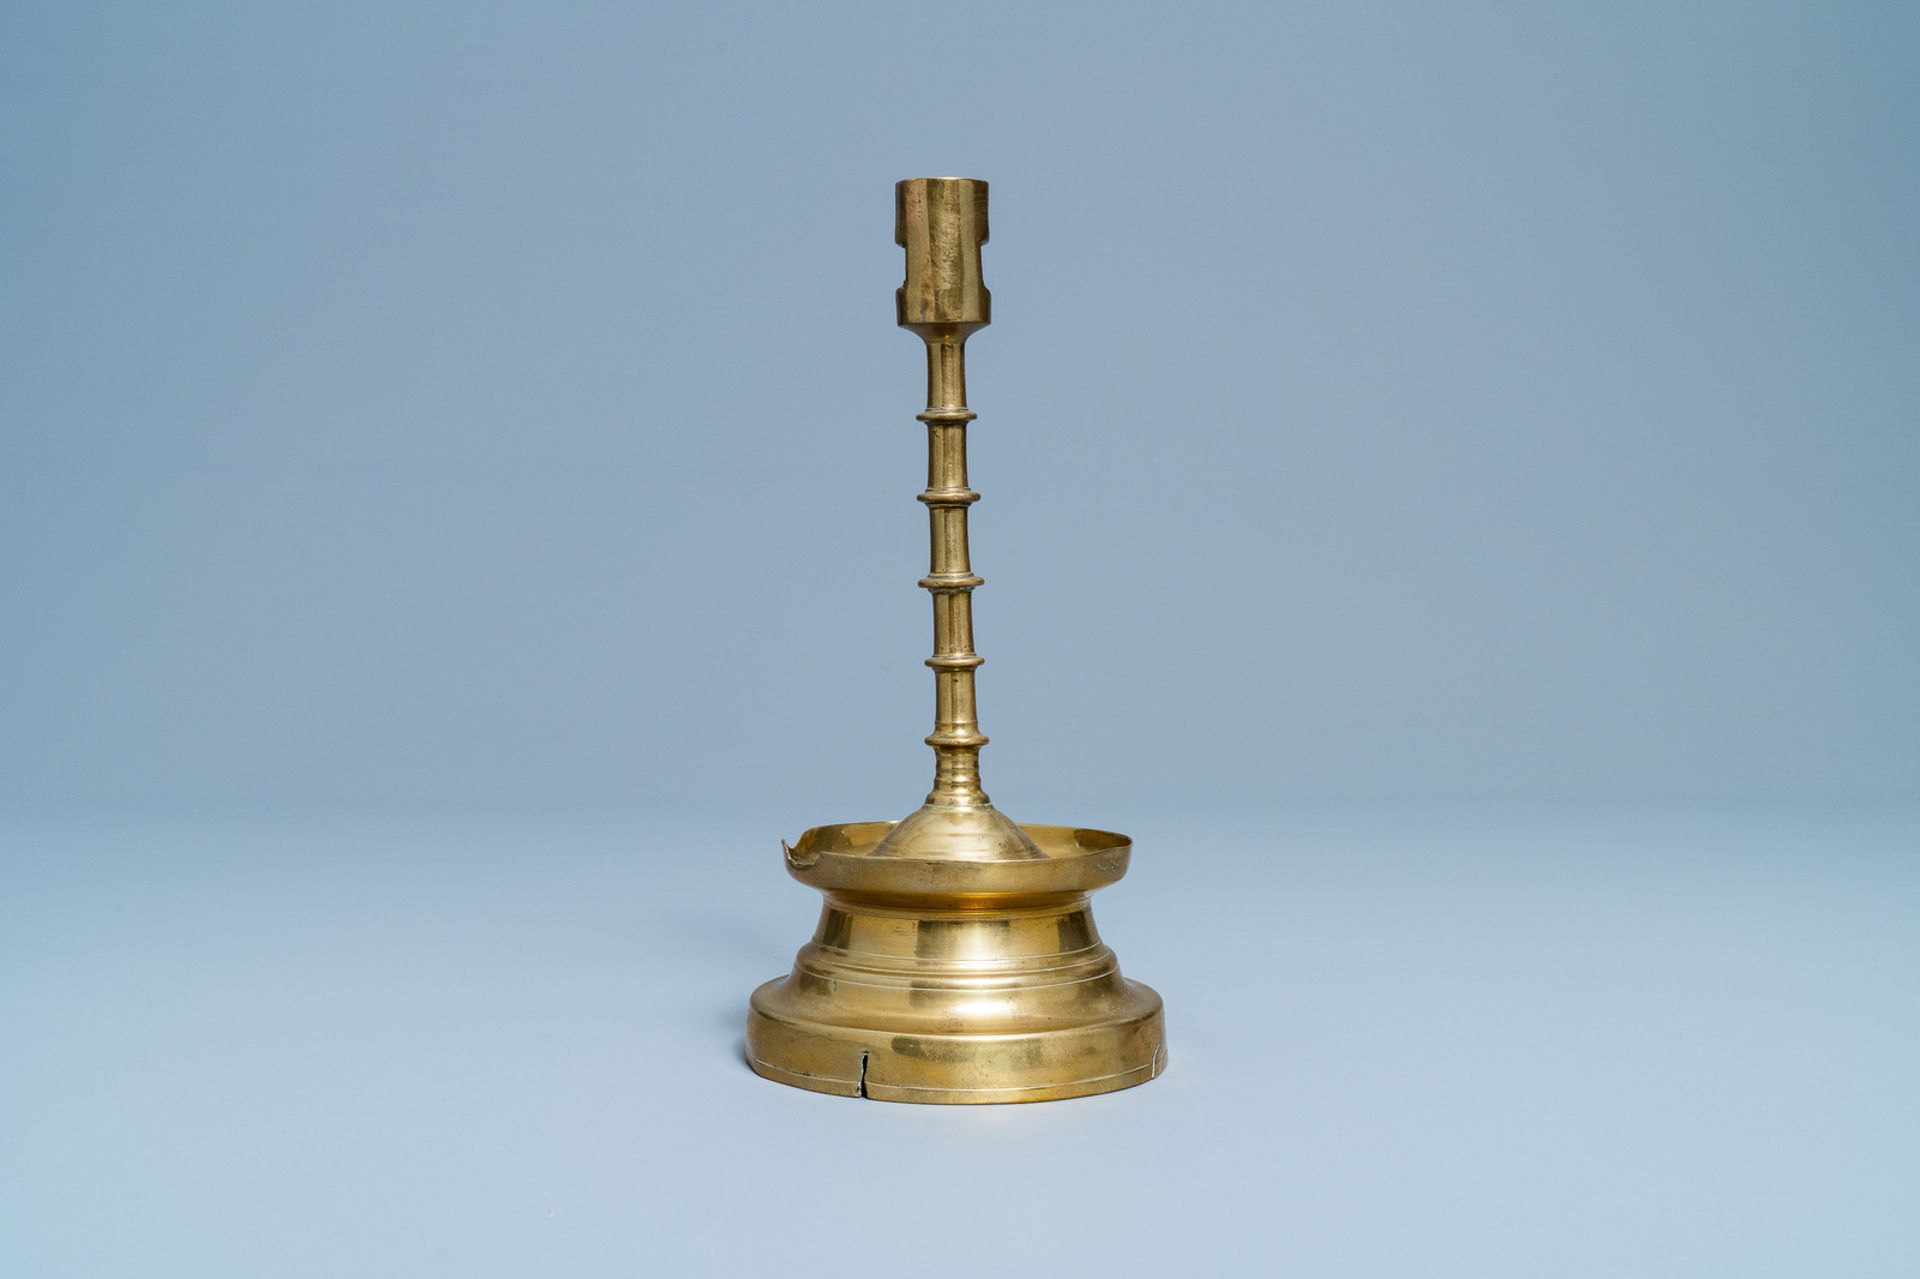 A Flemish or Dutch knotted bronze candlestick, 15th C. - Image 2 of 6